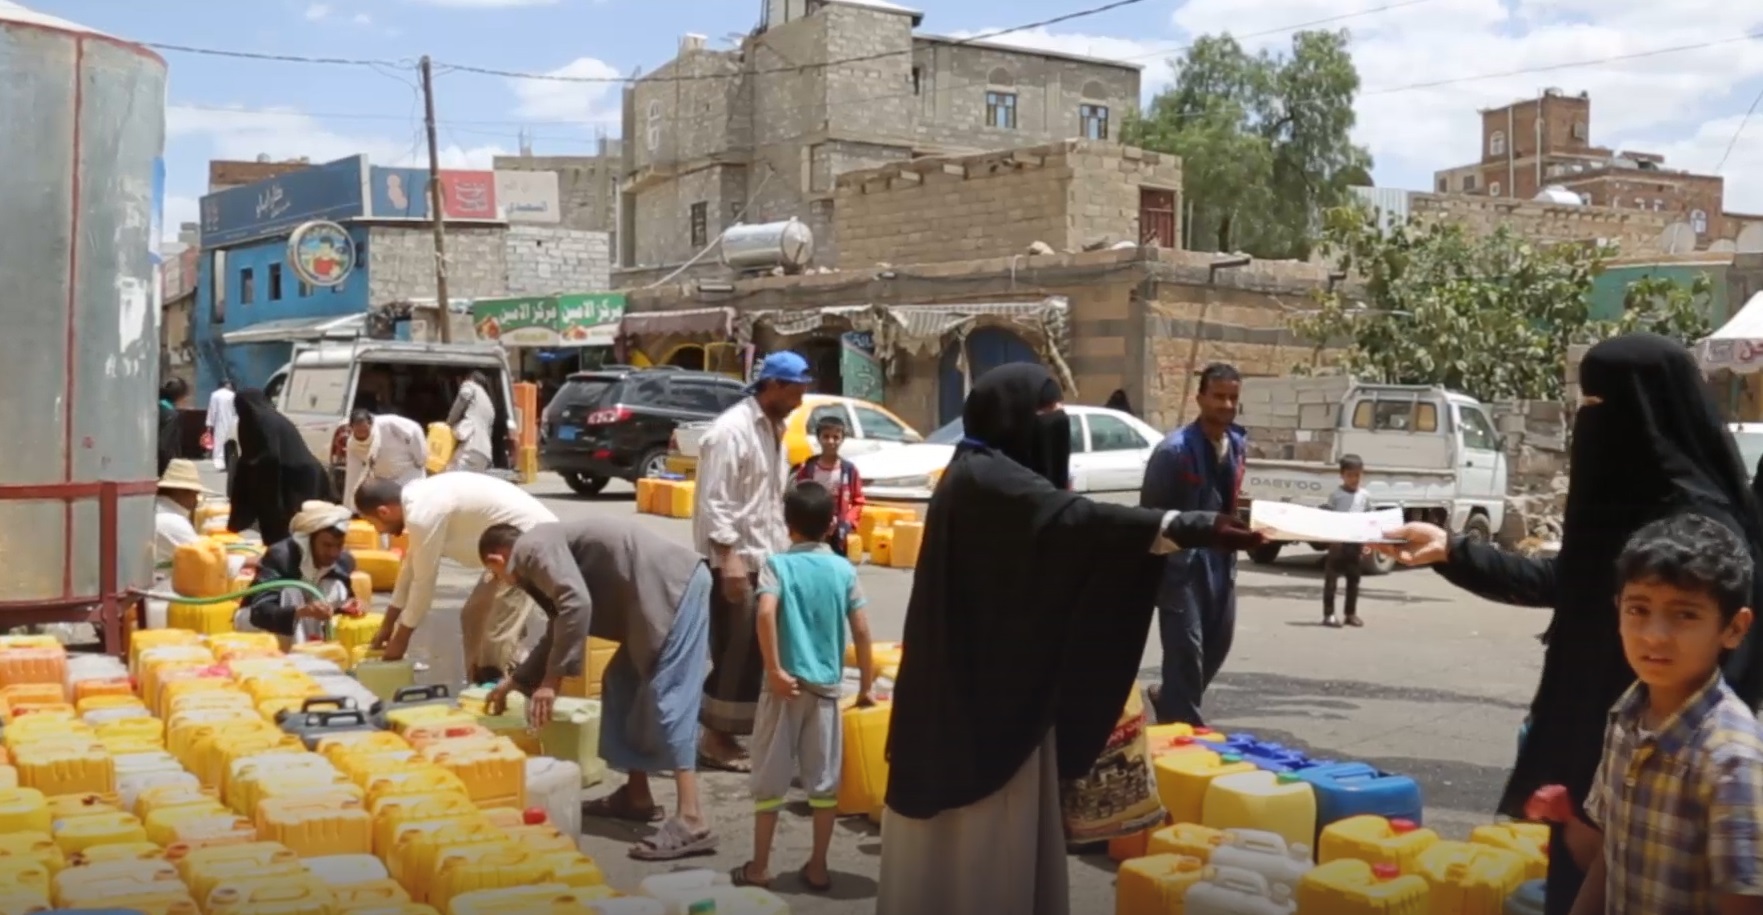 UNICEF distributes clean water and information about cholera to prevent outbreaks of the disease in Yemen